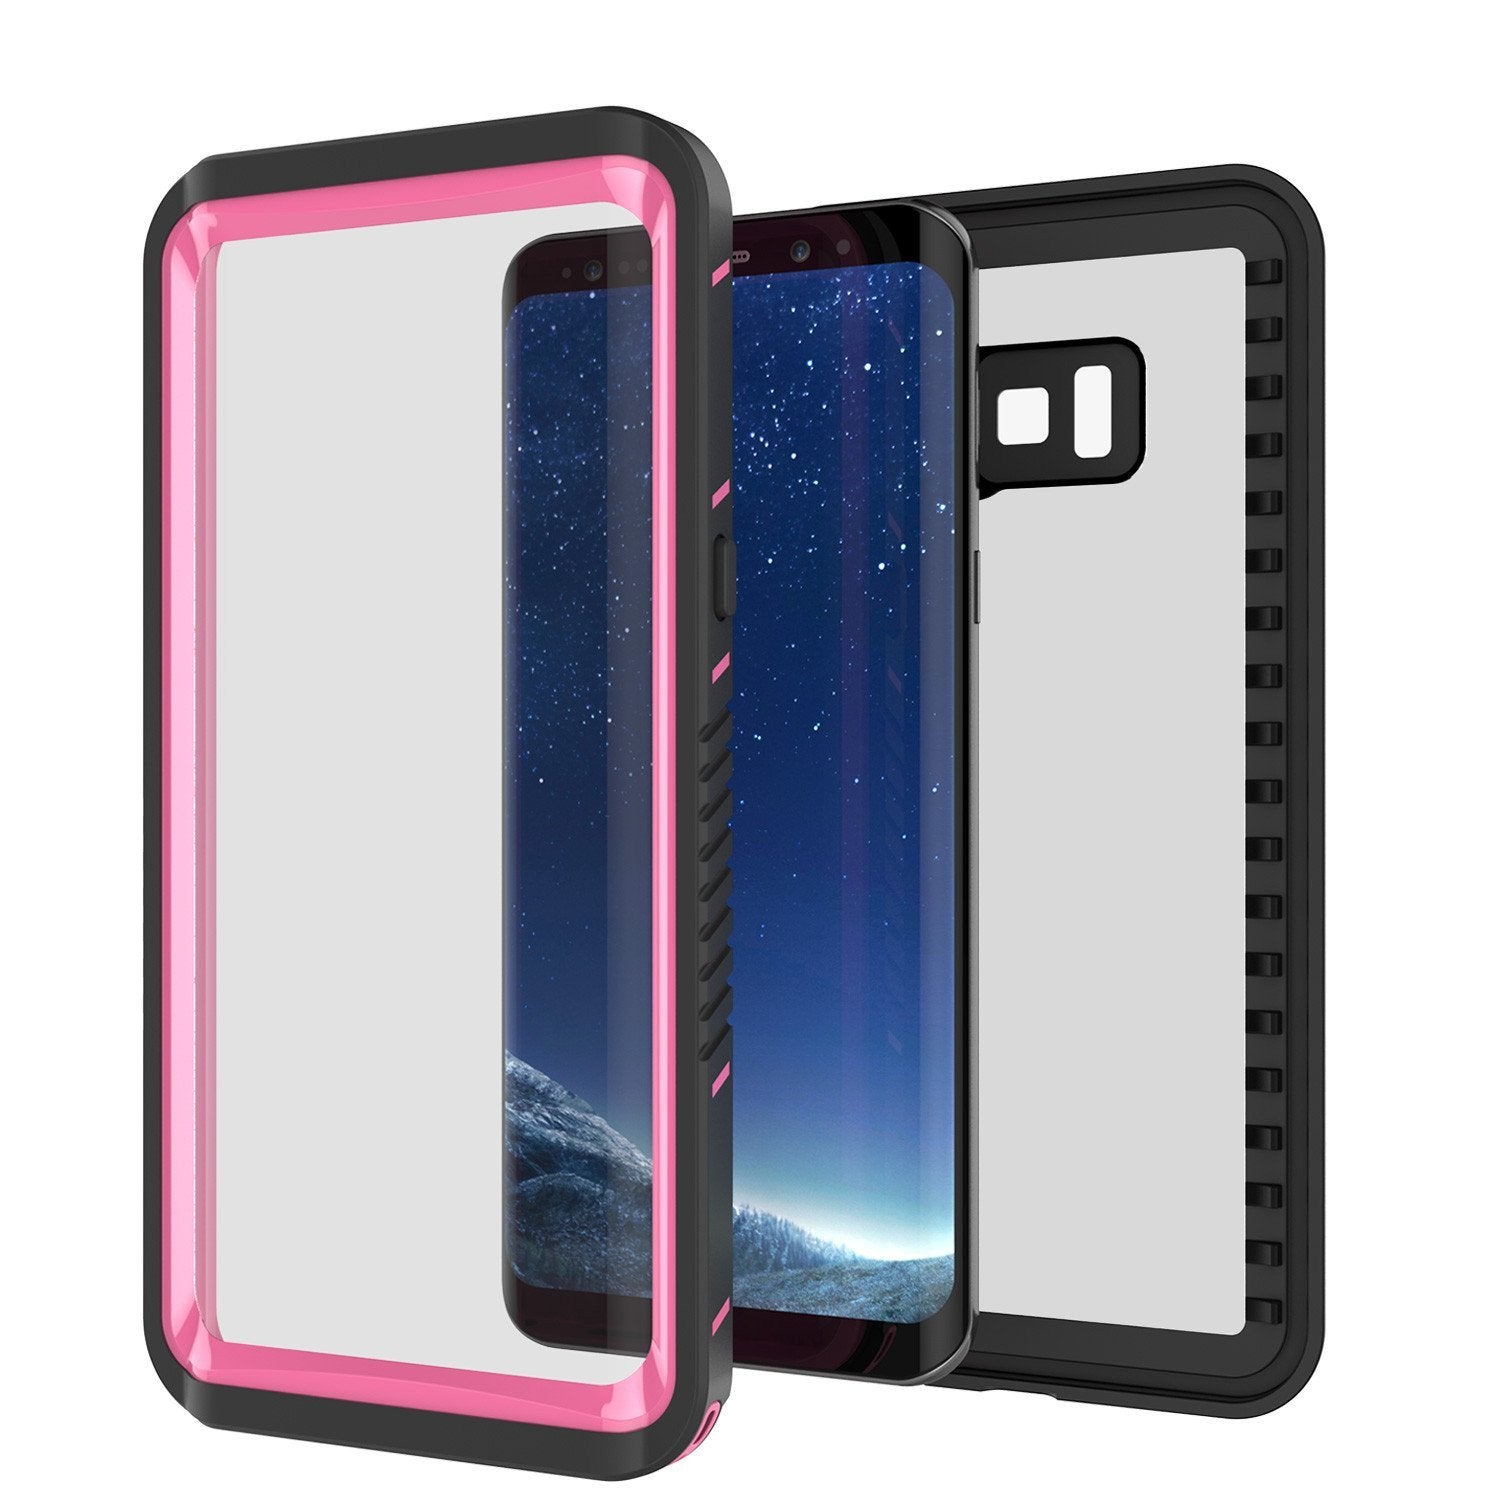 Galaxy S8 PLUS Case, Punkcase [Extreme Series] Armor Pink Cover